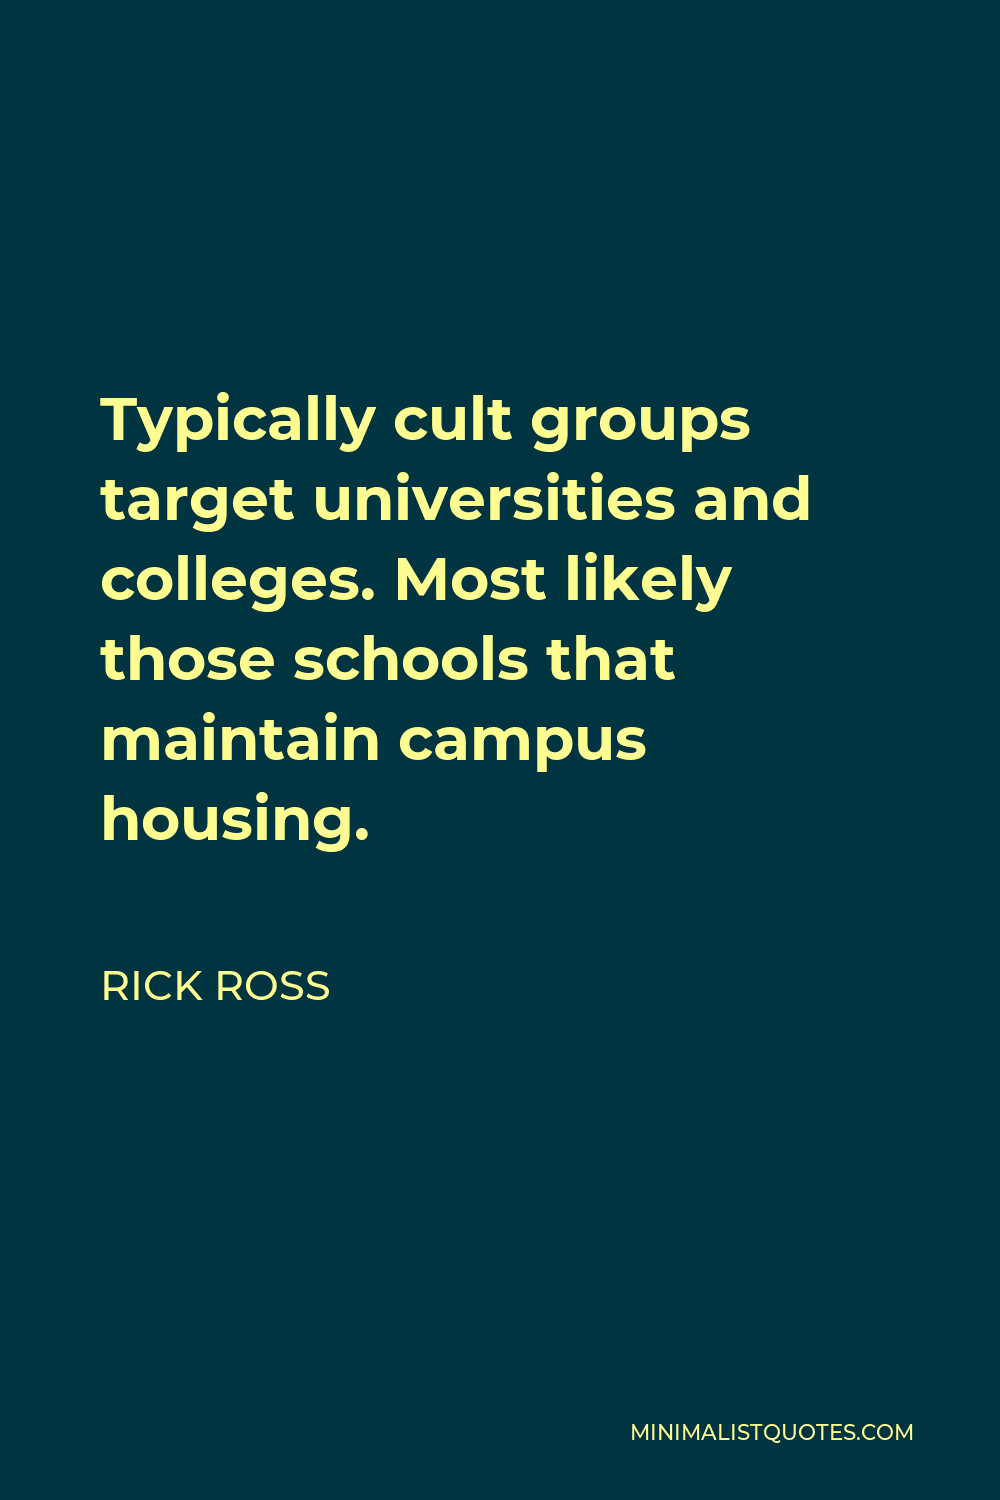 Rick Ross Quote - Typically cult groups target universities and colleges. Most likely those schools that maintain campus housing.